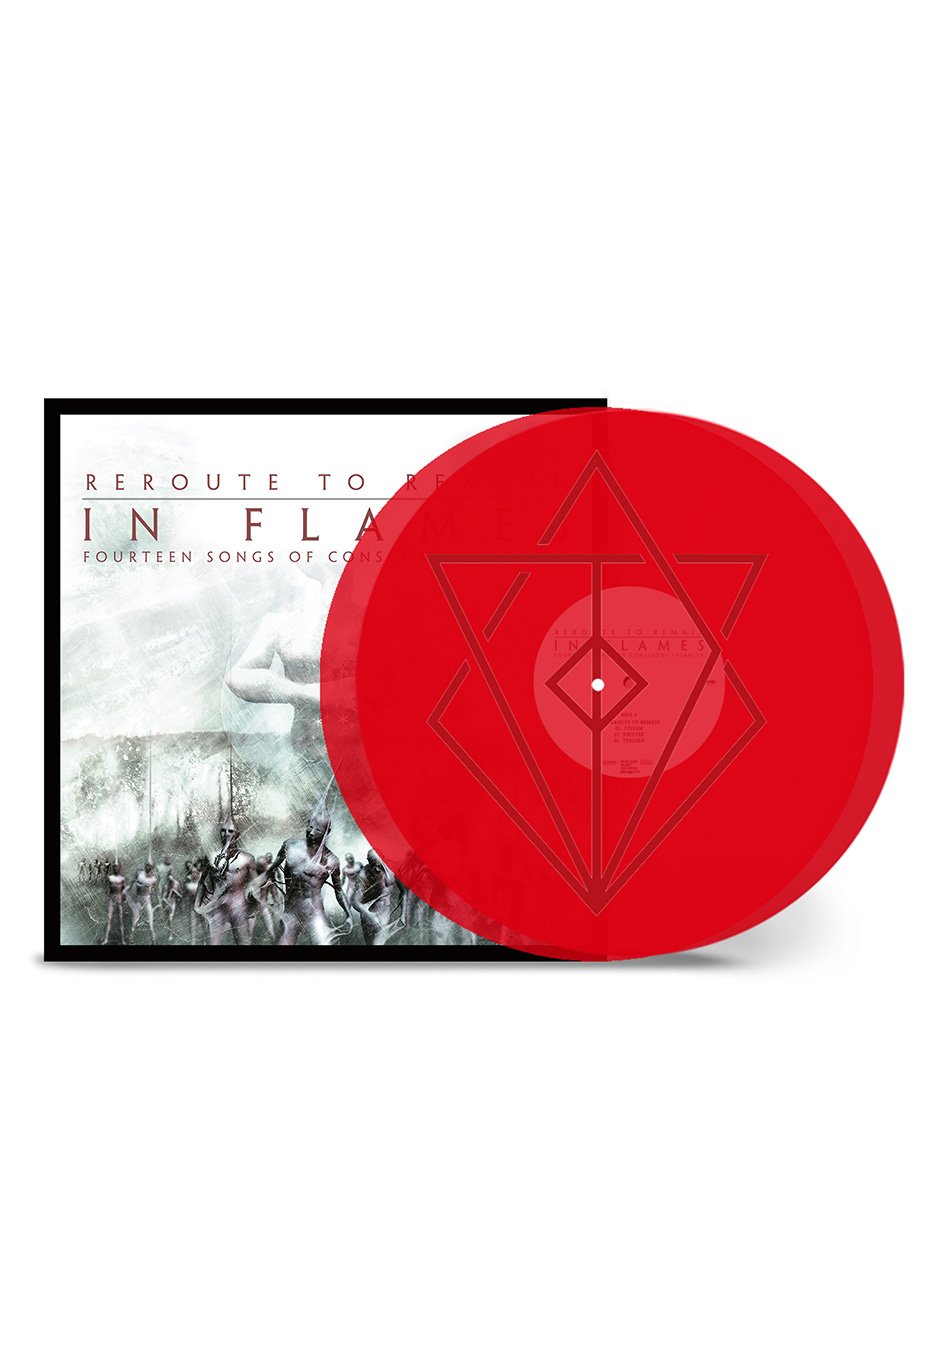 In Flames - Reroute To Remain Ltd. Transparent Red - Colored 2 Vinyl